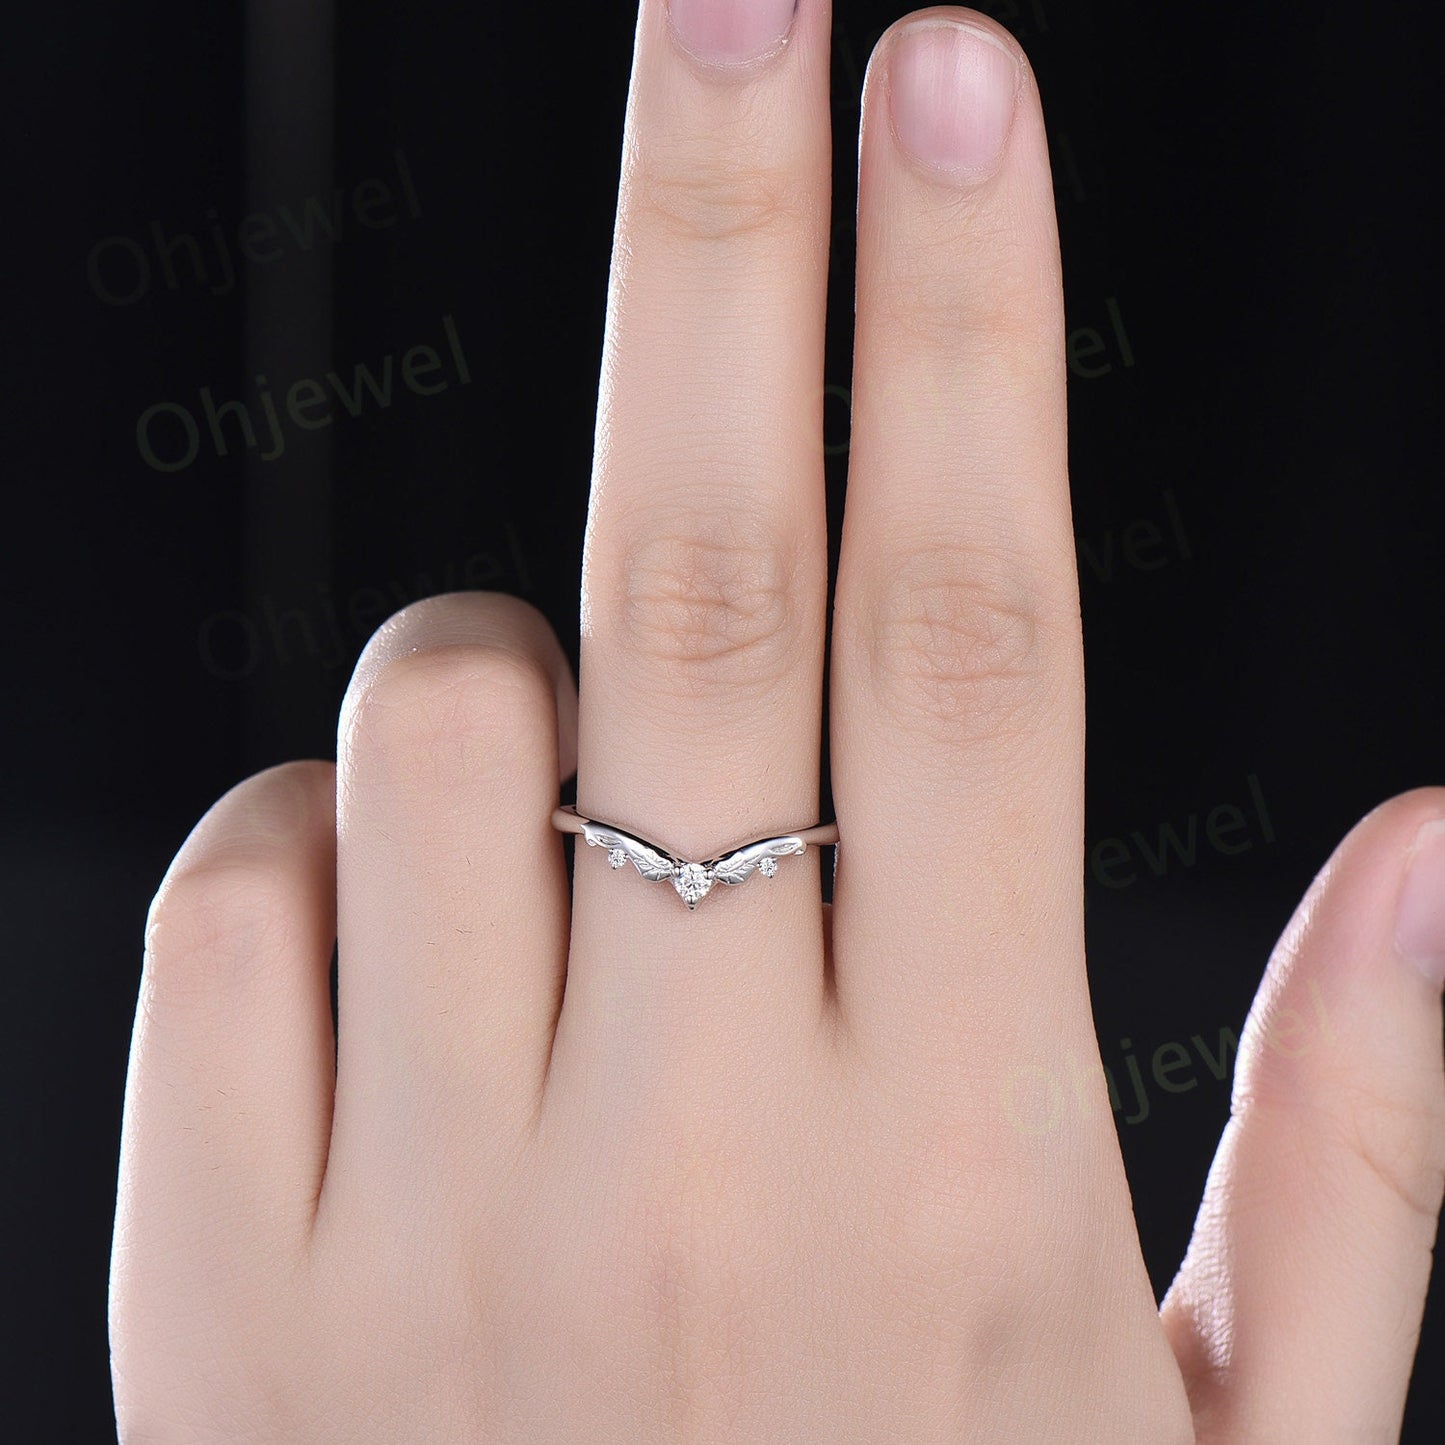 Vintage diamond wedding band 14k rose gold unique V shaped curved moissanite wedding ring band silver stacking anniversary ring women gift